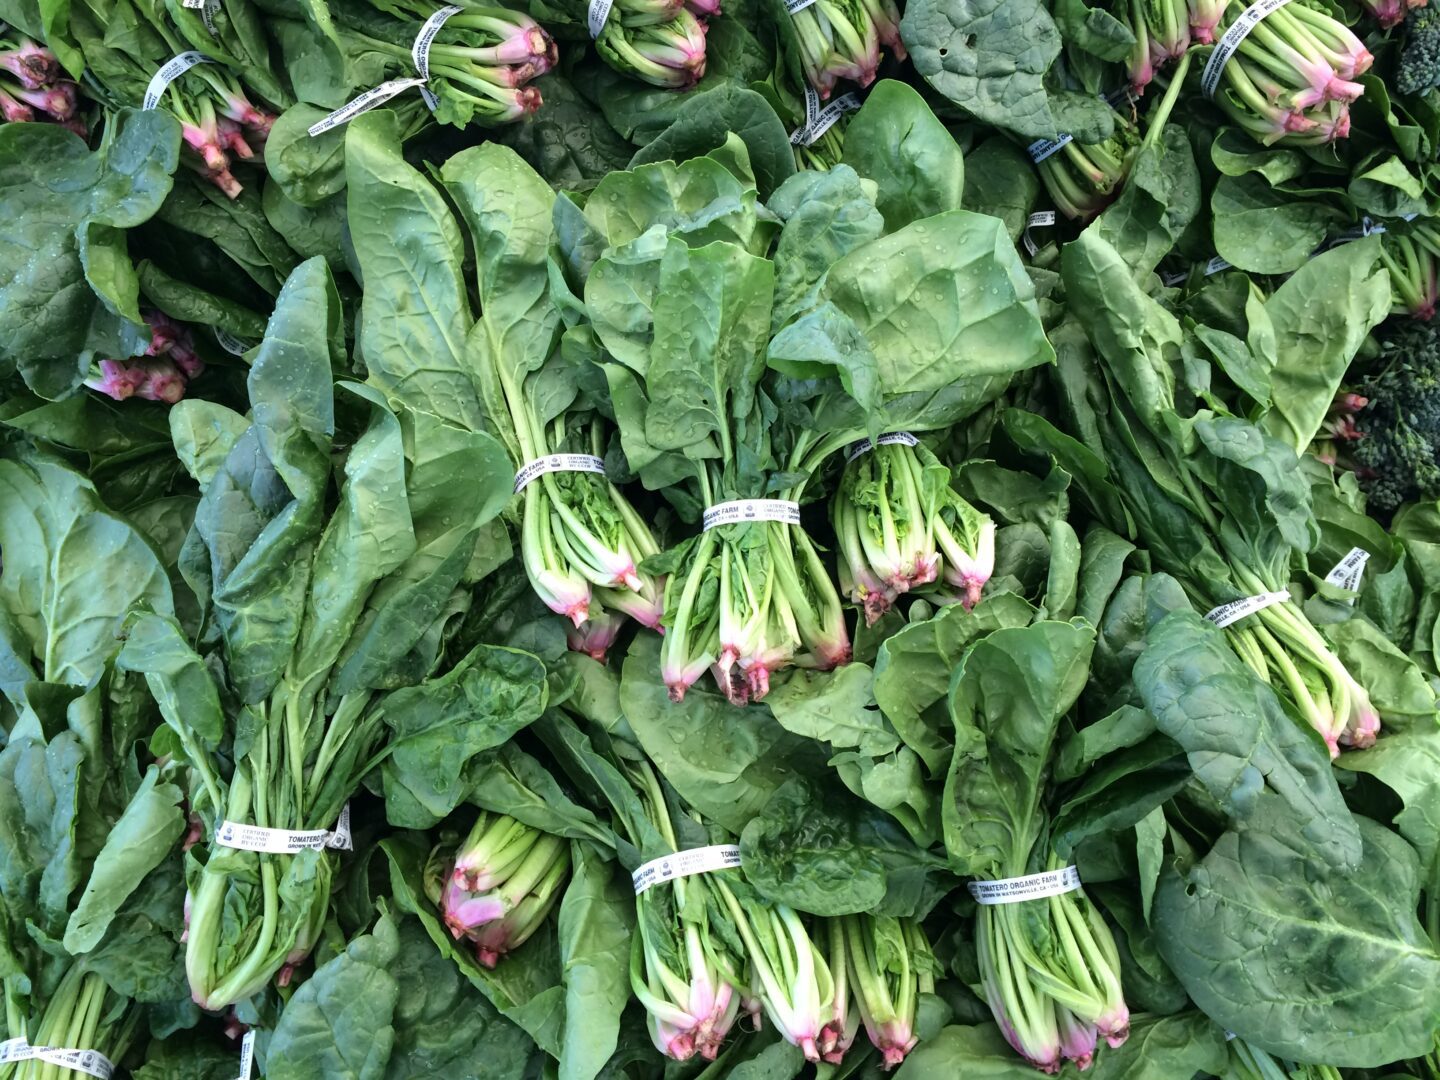 A bunch of spinach leaves are piled up in a market.